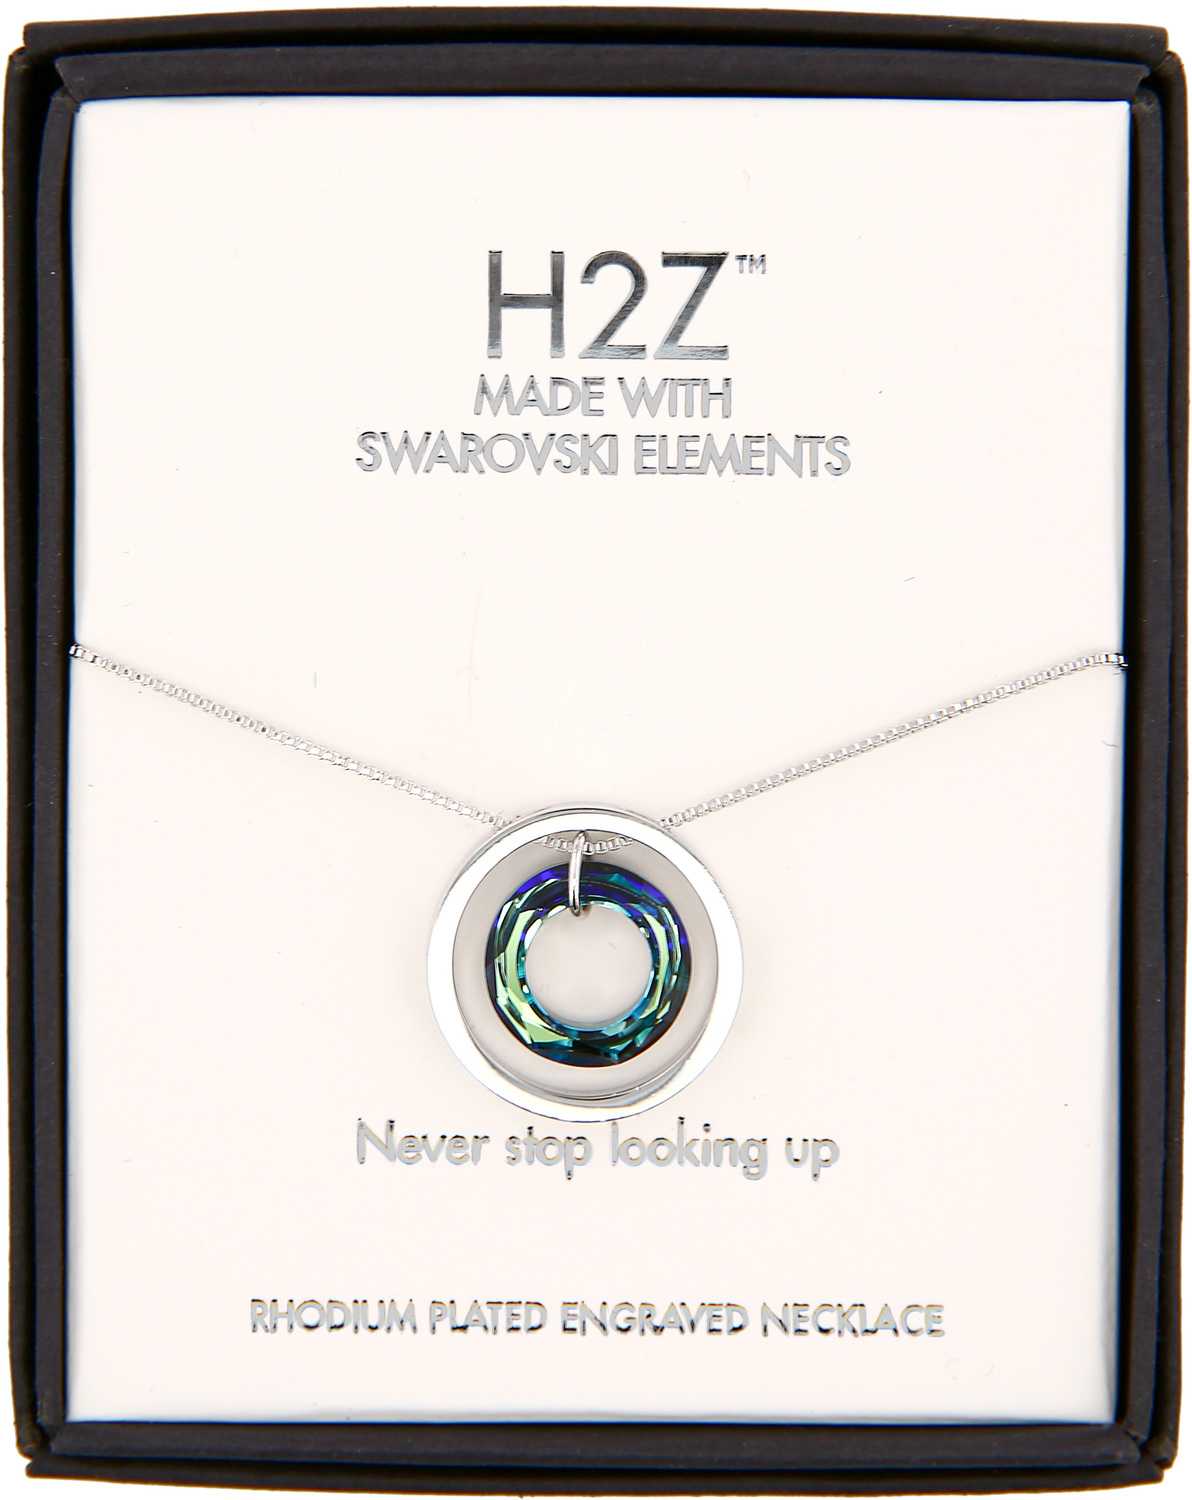 Look Up
Bermuda Blue Crystal by H2Z Made with Swarovski Elements - Look Up
Bermuda Blue Crystal - 17"-19" Engraved Rhodium Plated Austrian Element Necklace